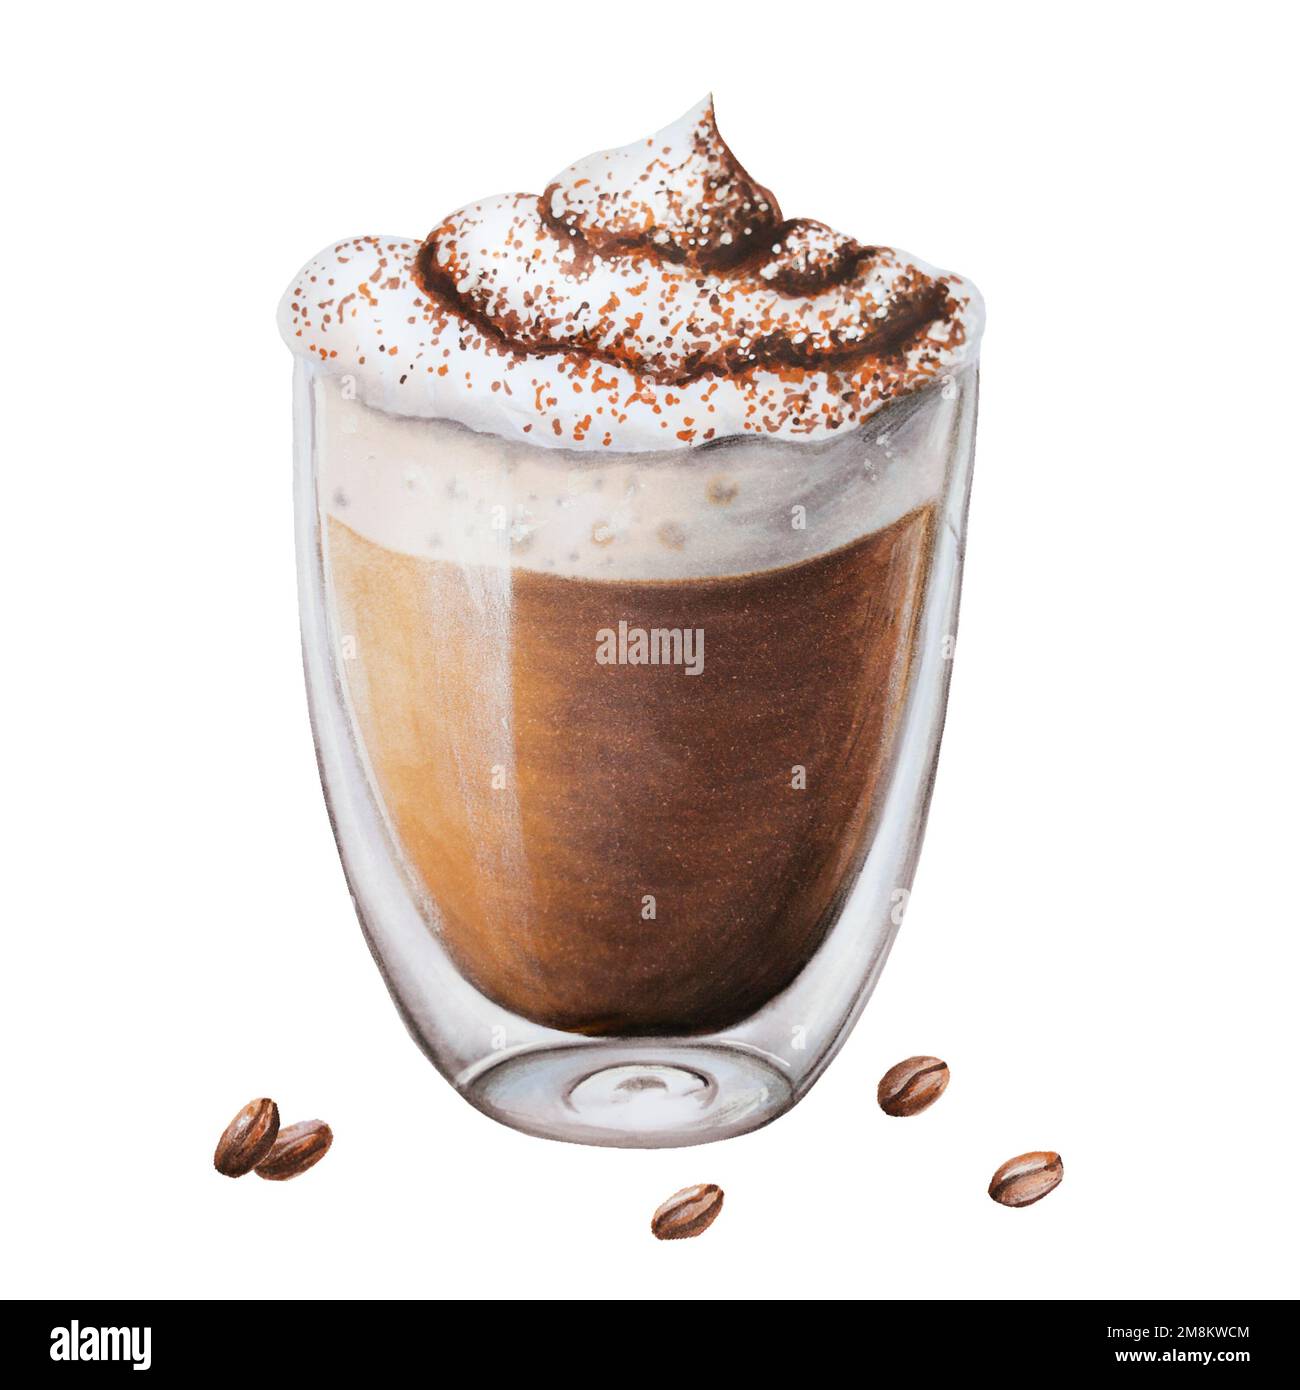 https://c8.alamy.com/comp/2M8KWCM/watercolor-fluffy-foam-mocha-illustration-coffee-in-a-glass-cup-with-coffee-beens-hand-painting-on-a-white-isolated-background-for-designers-menu-2M8KWCM.jpg